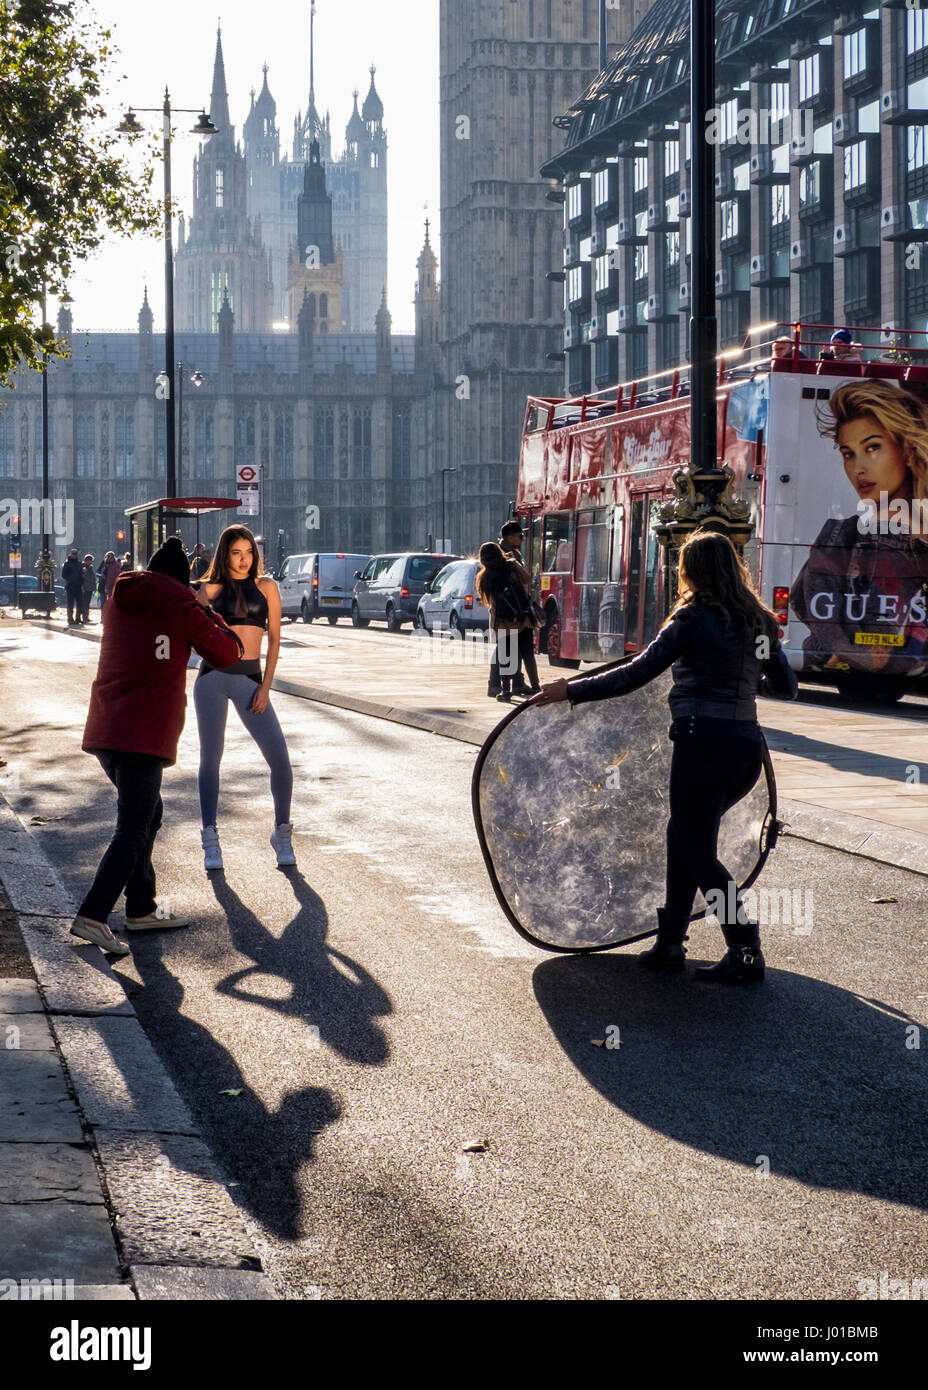 London, England. Model Posing for photographer in a bike lane front of the UK Houses of Parliament, Westminster Palace Government building Stock Photo